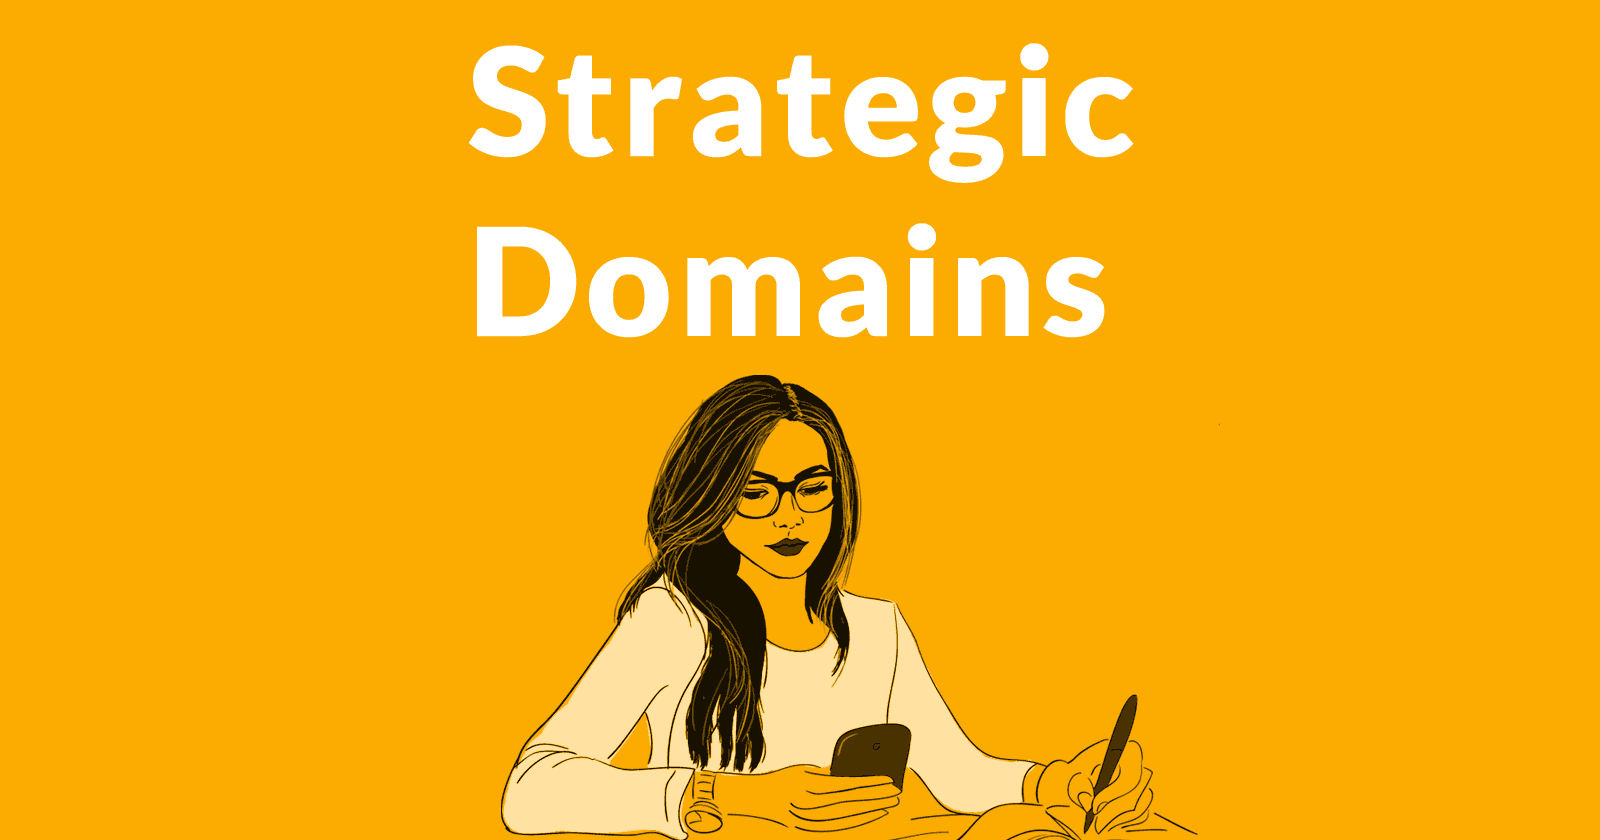 Image of a woman making calculations and the words Strategic Domains above that image